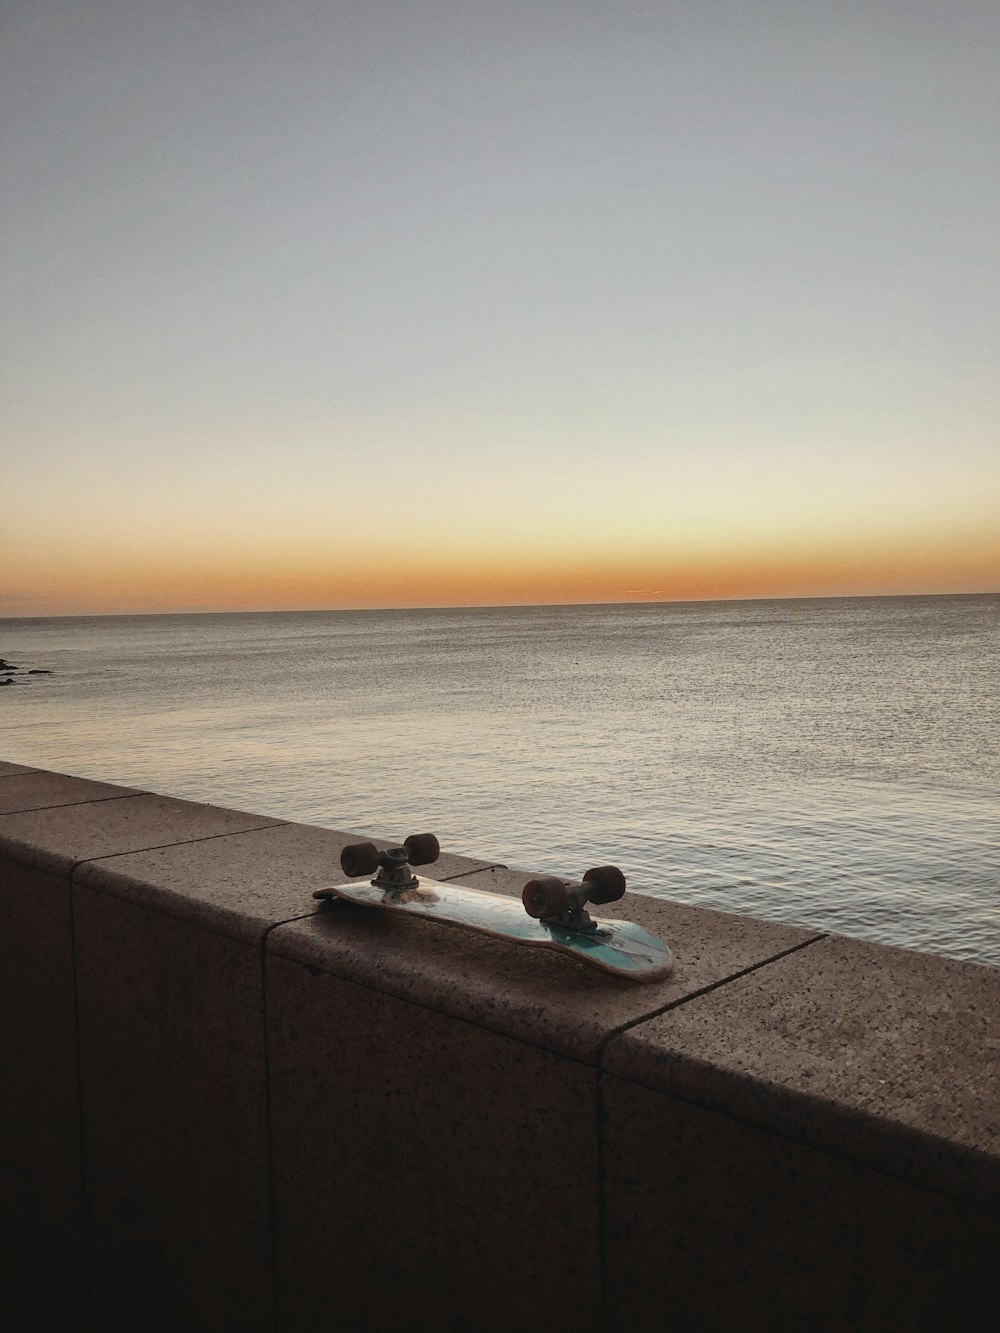 a skateboard sitting on a ledge next to the ocean